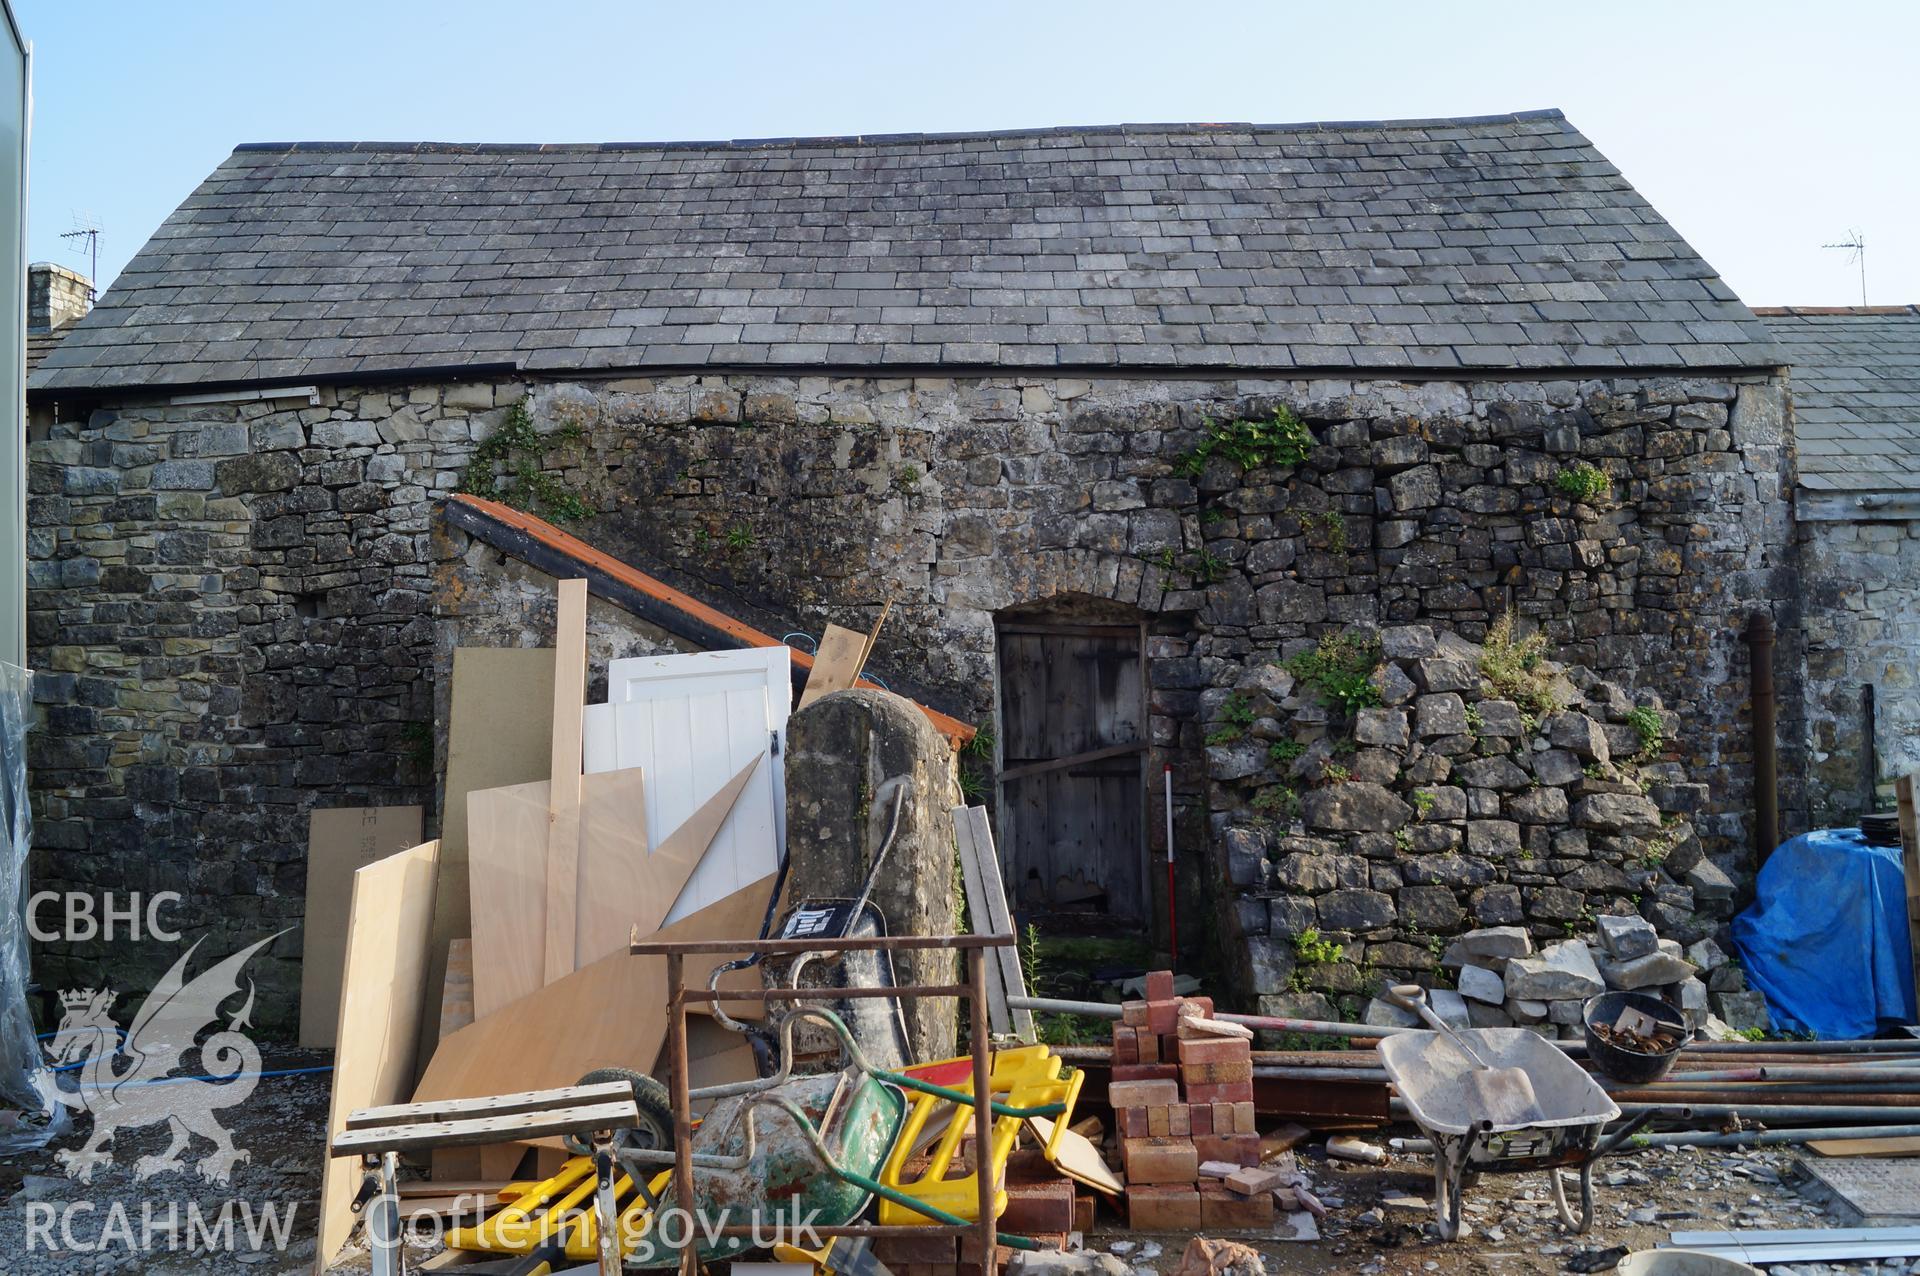 View 'looking south southeast from the northern side of the building, looking at the main barn, buttress and outdoor toilet' at Rowley Court, Llantwit Major. Photograph & description by Jenny Hall & Paul Sambrook of Trysor, 7th September 2016.